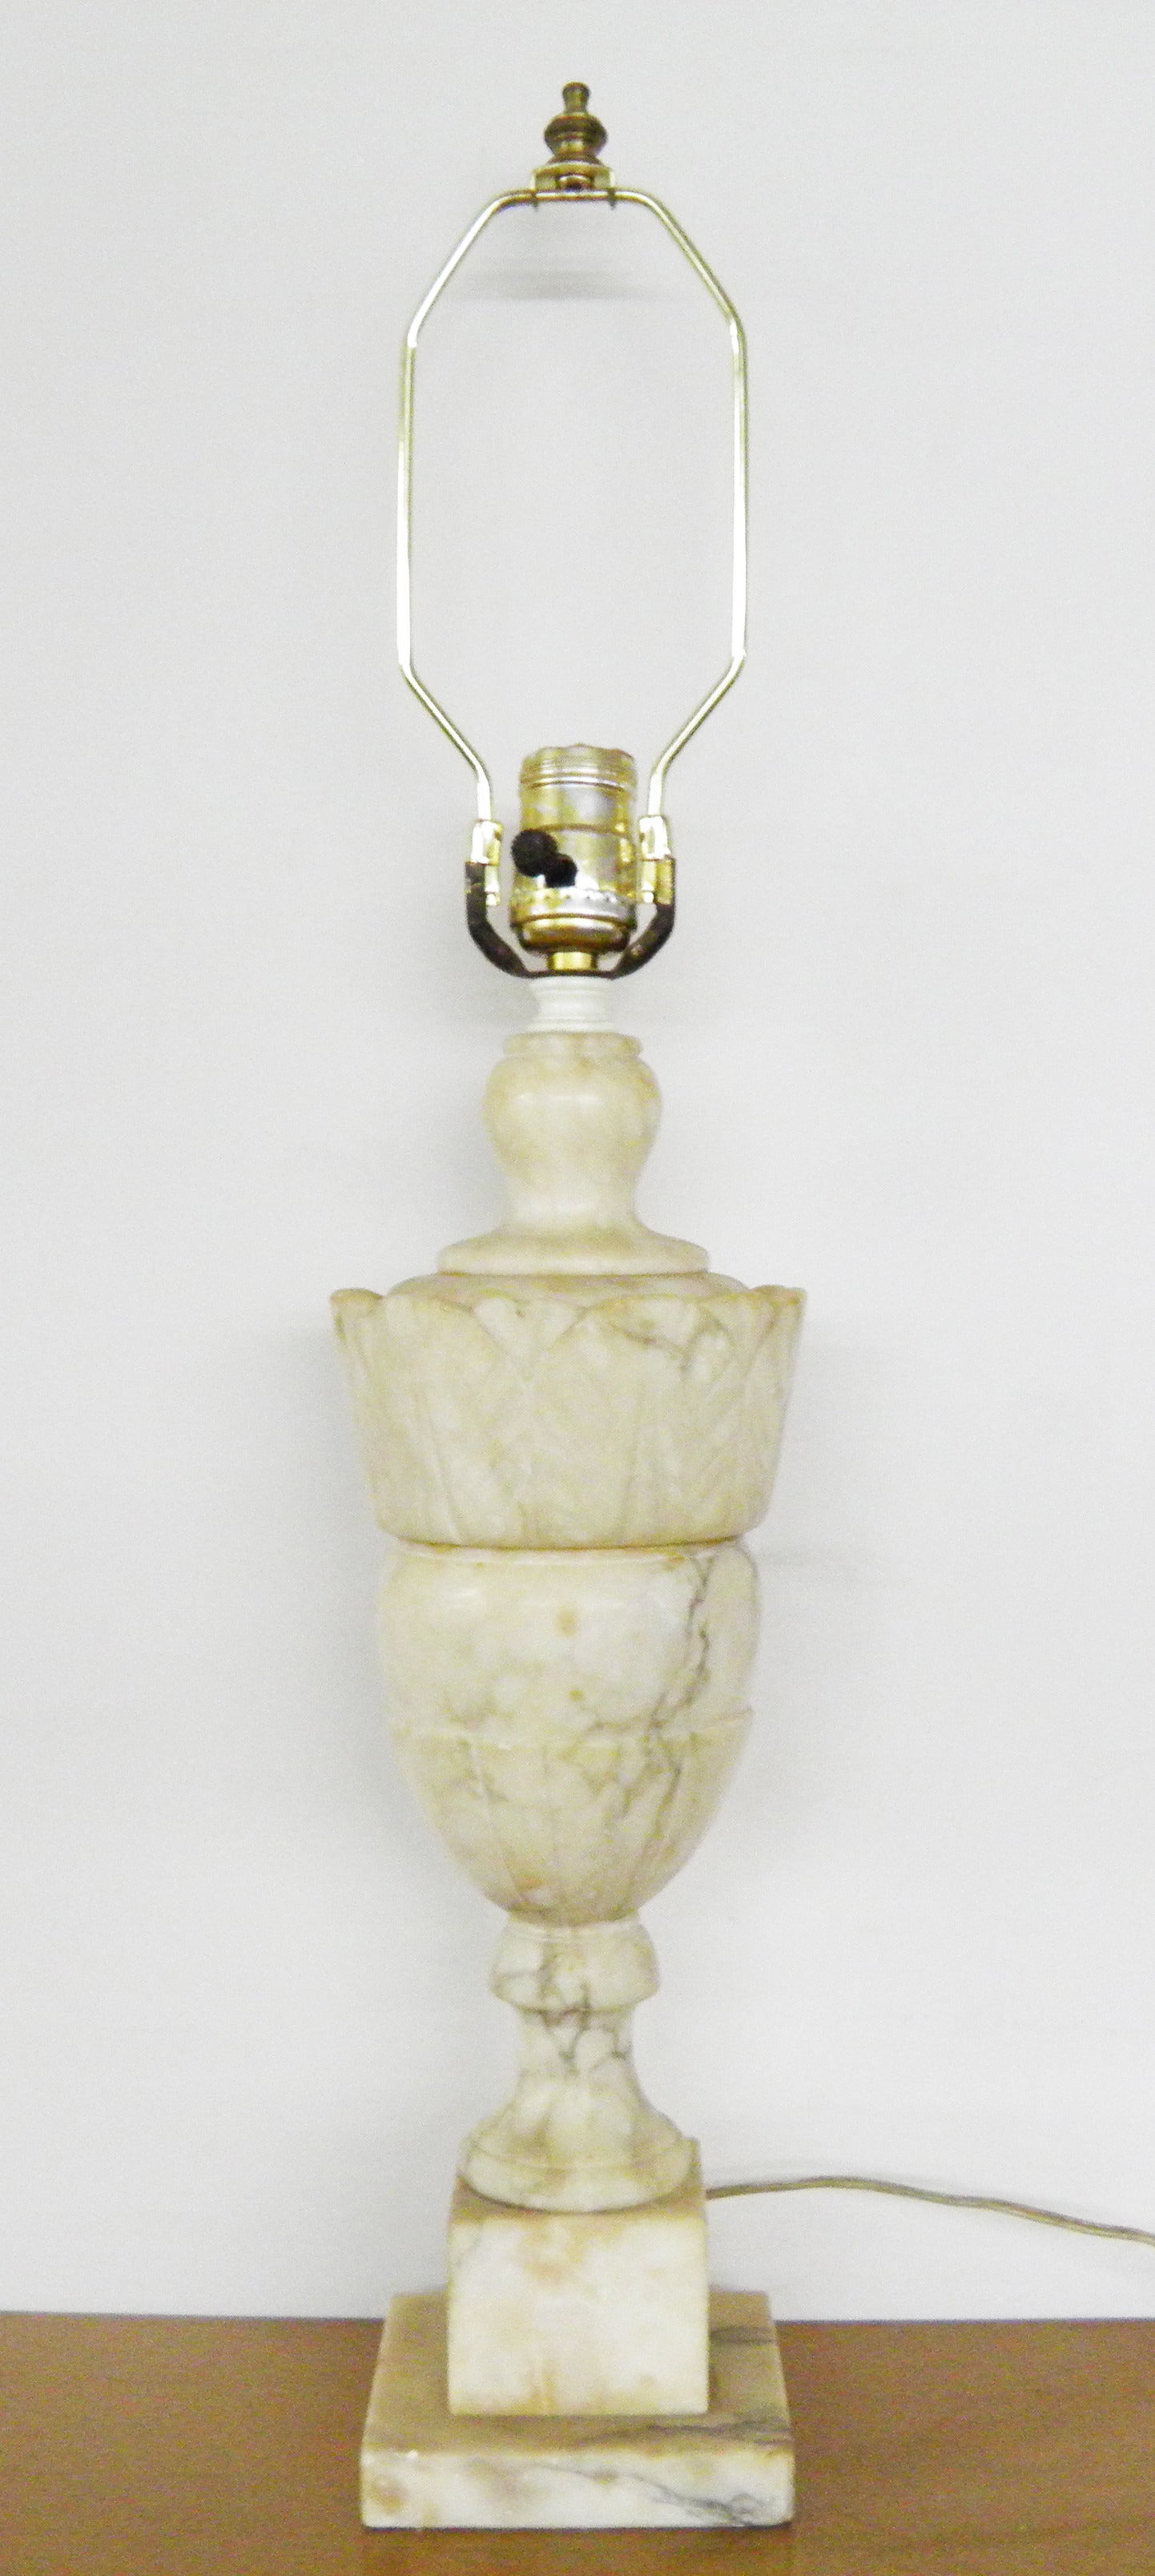 Classic Carrera Marble Urn Style Vase with Lamp Application